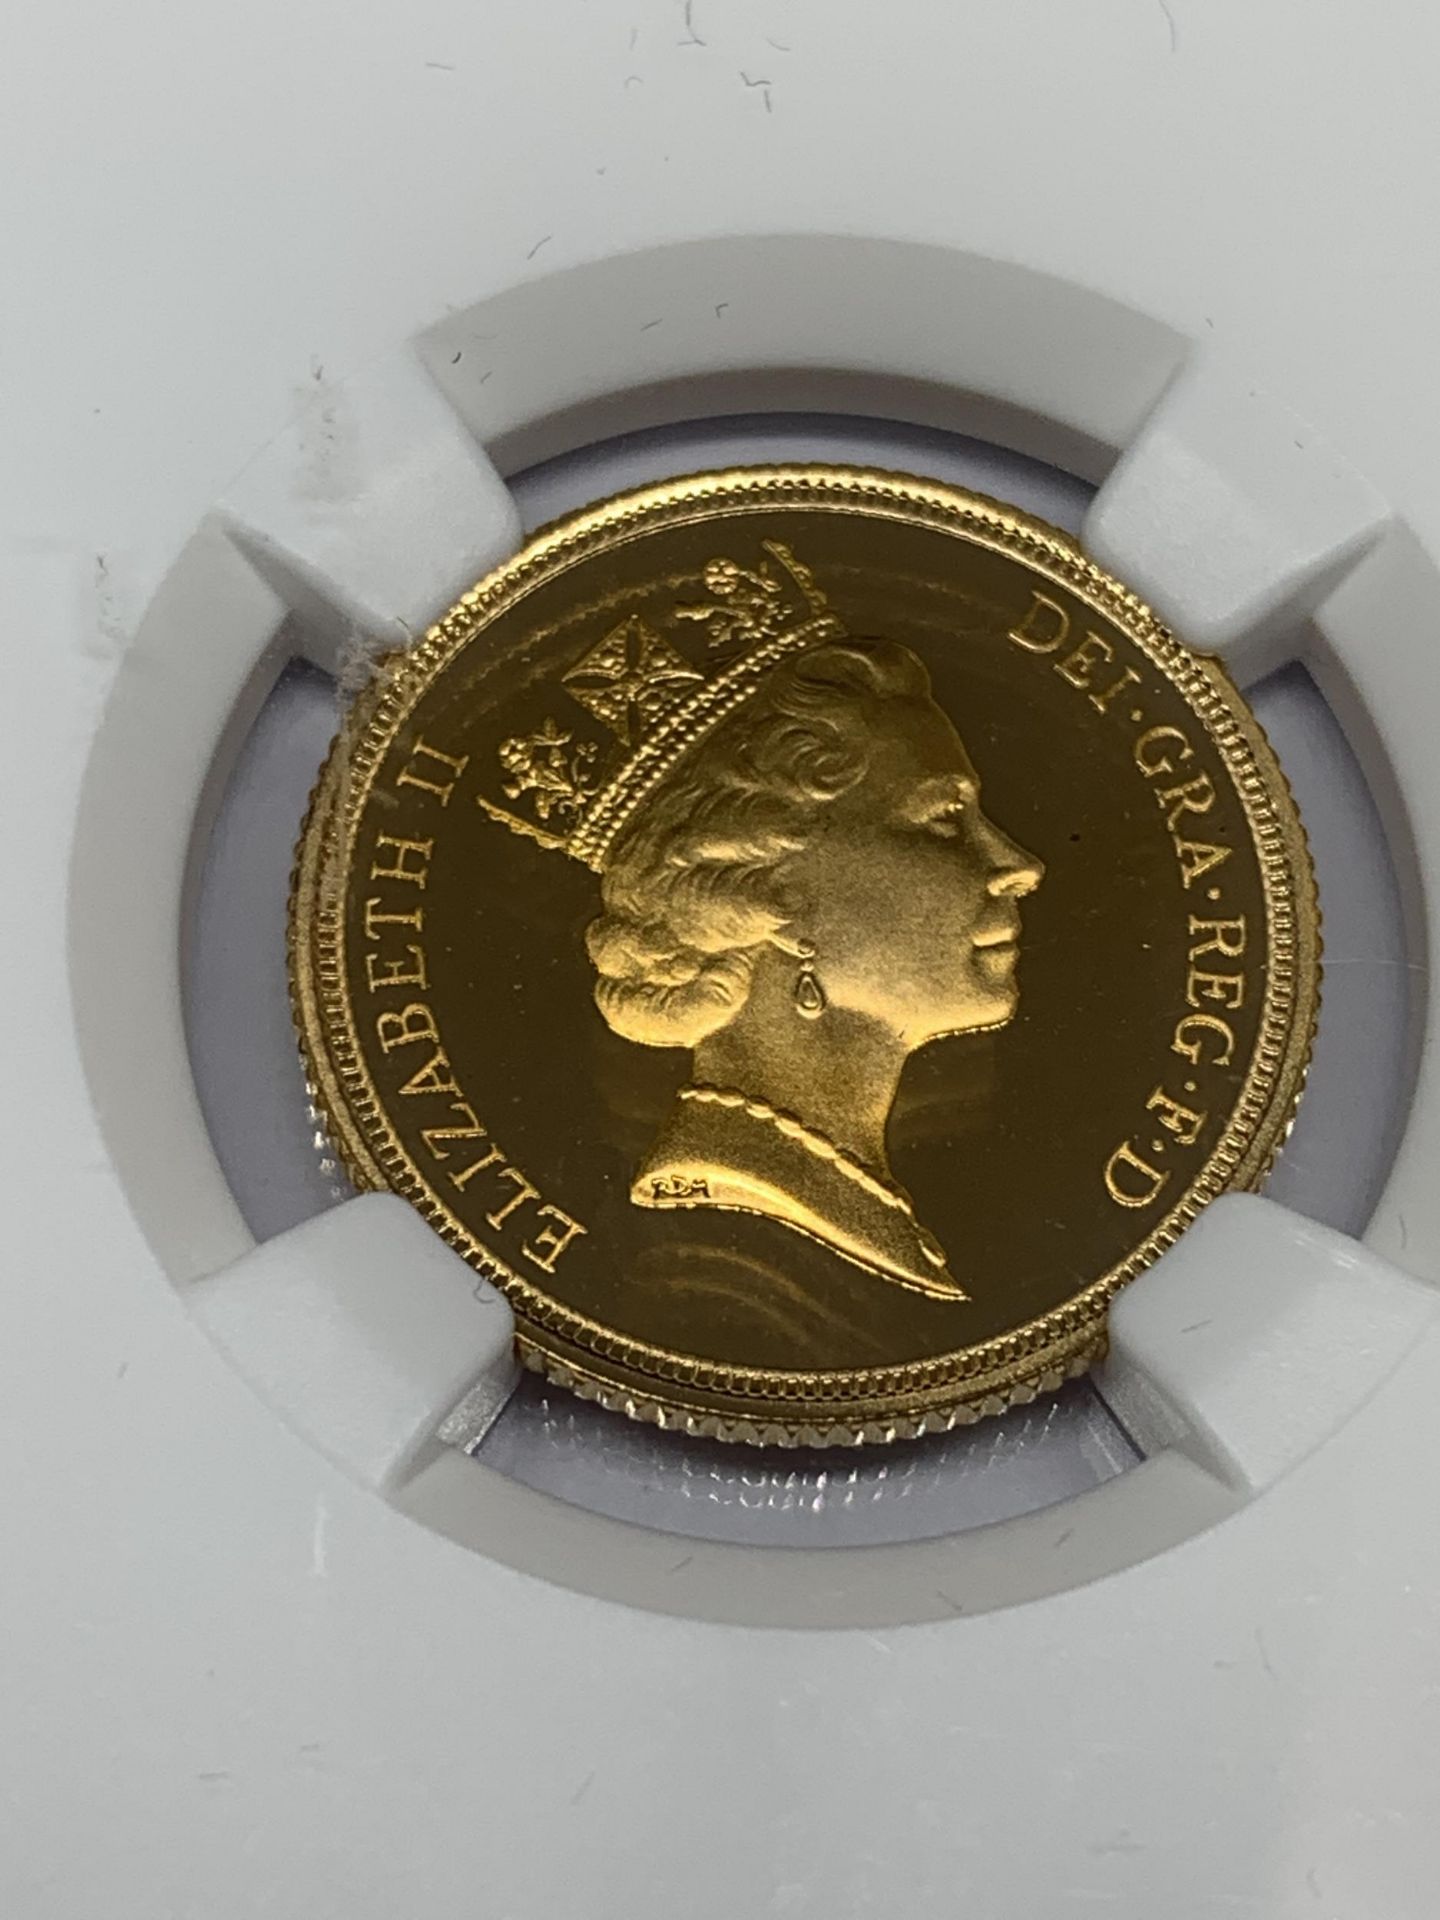 A PROOF 1993 GOLD SOVEREIGN QUEEN ELIZABETH II LONDON MINT IN A SEALED NGC CASE - Image 2 of 4